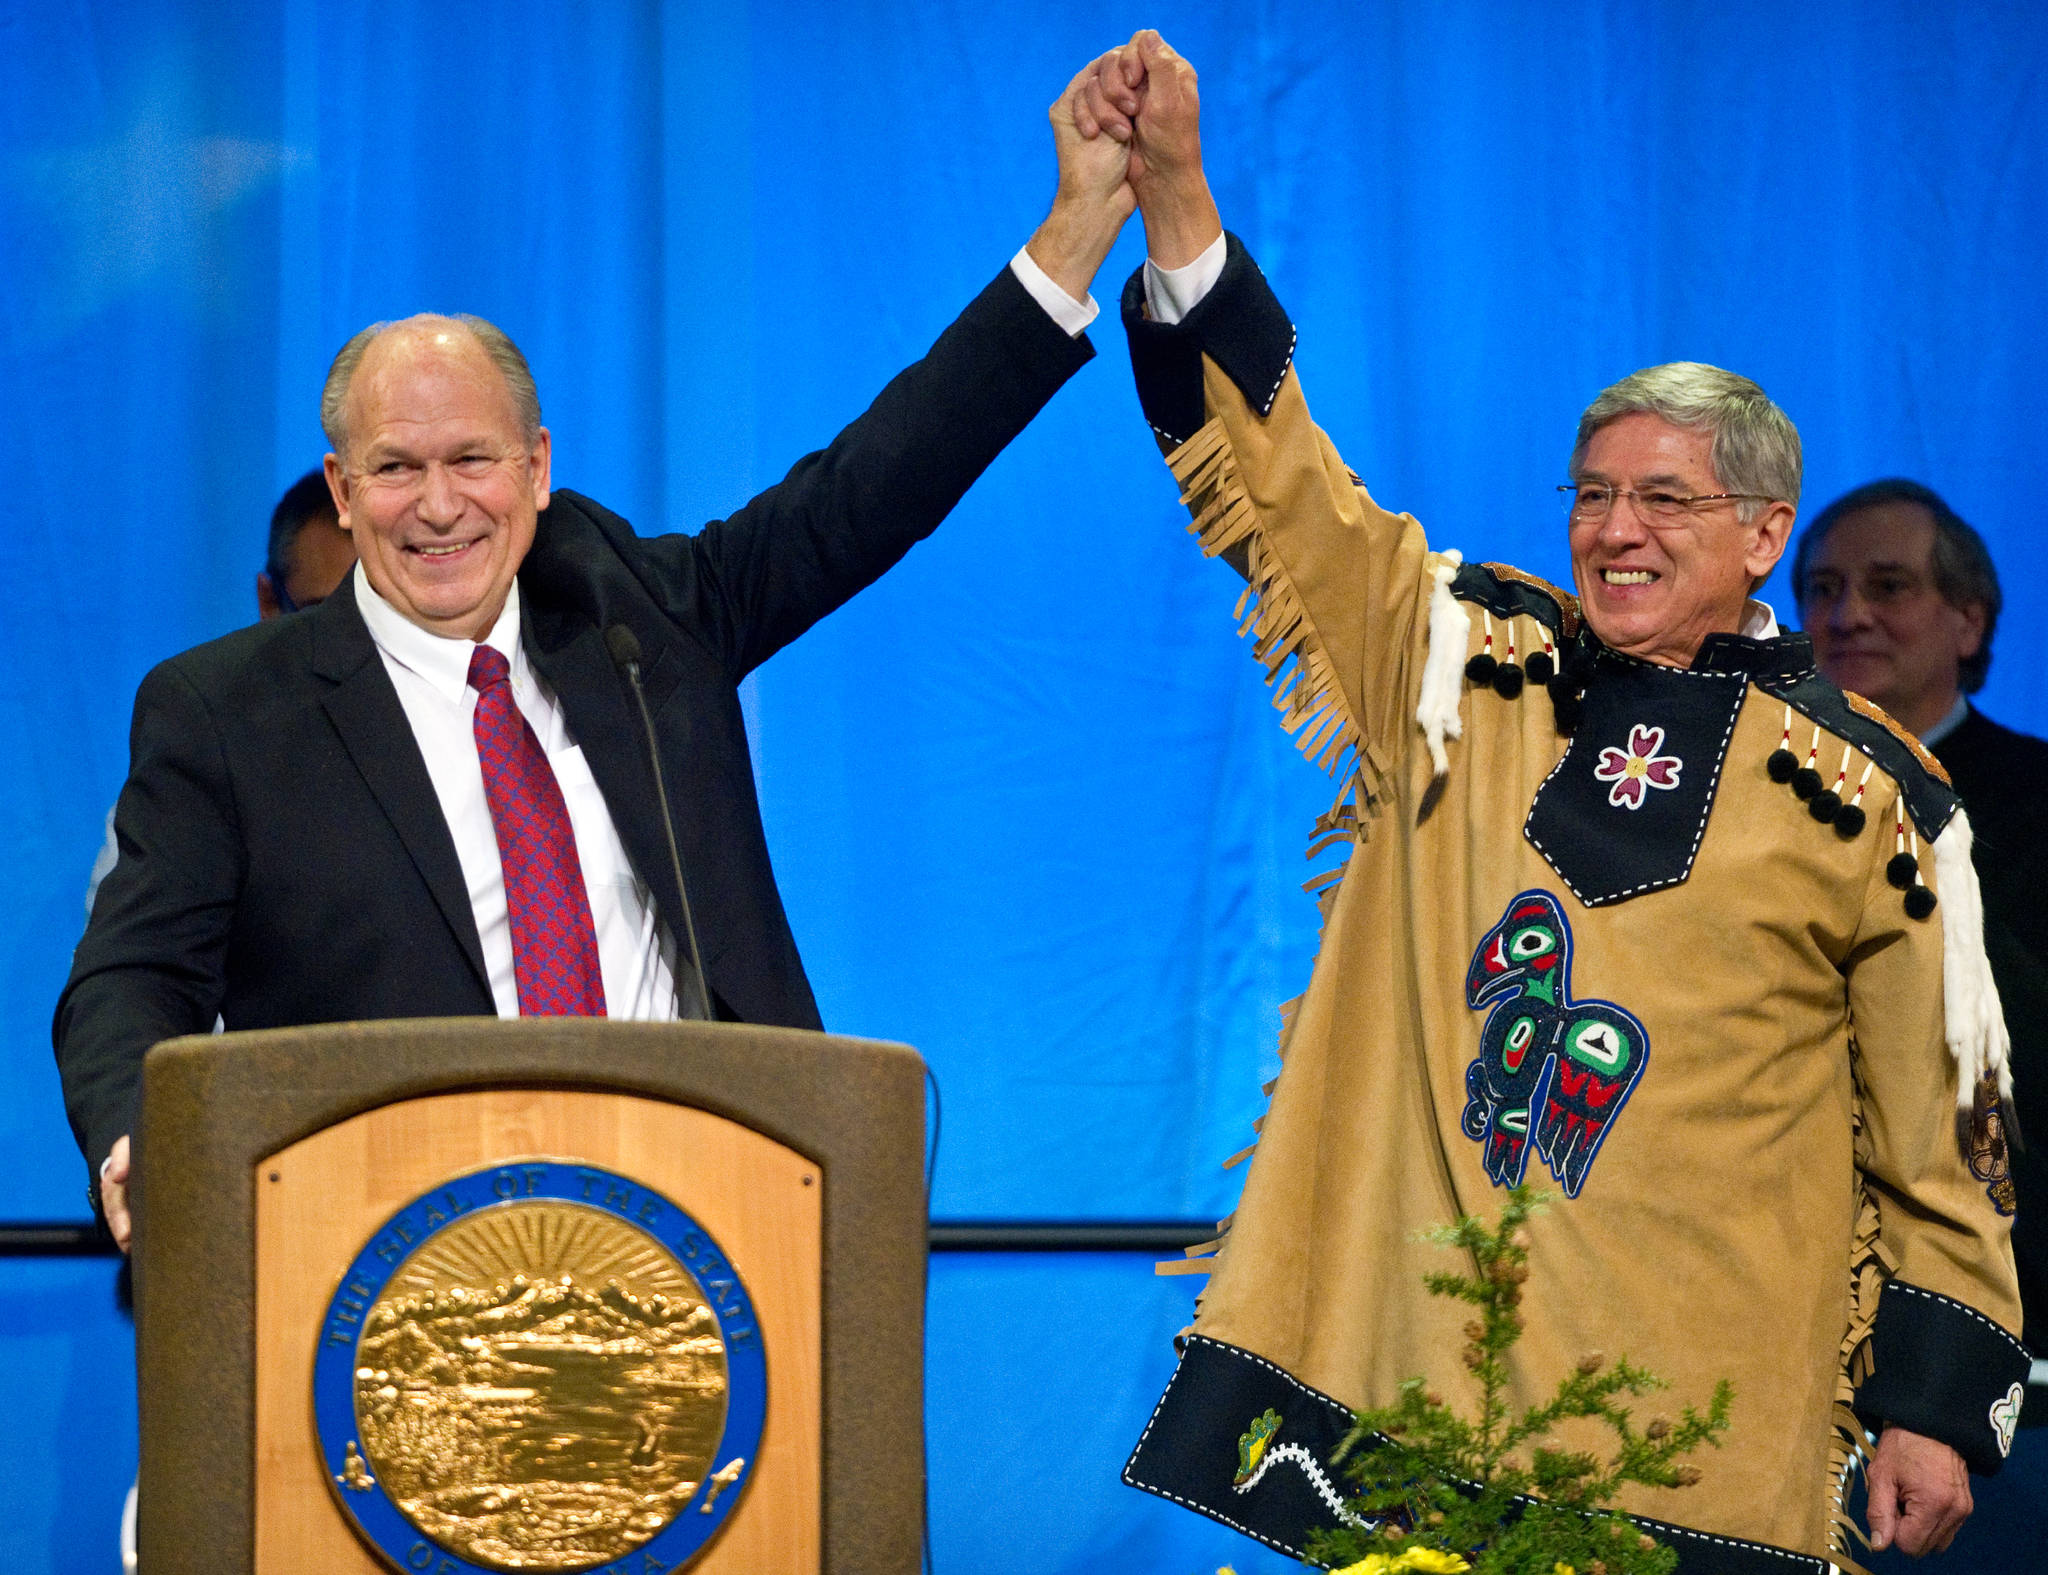 Gov. Bill Walker, left, and Lt. Gov. Byron Mallott join hands on stage at the end of inauguration ceremonies at Centennial Hall on Monday, Dec. 1, 2014.